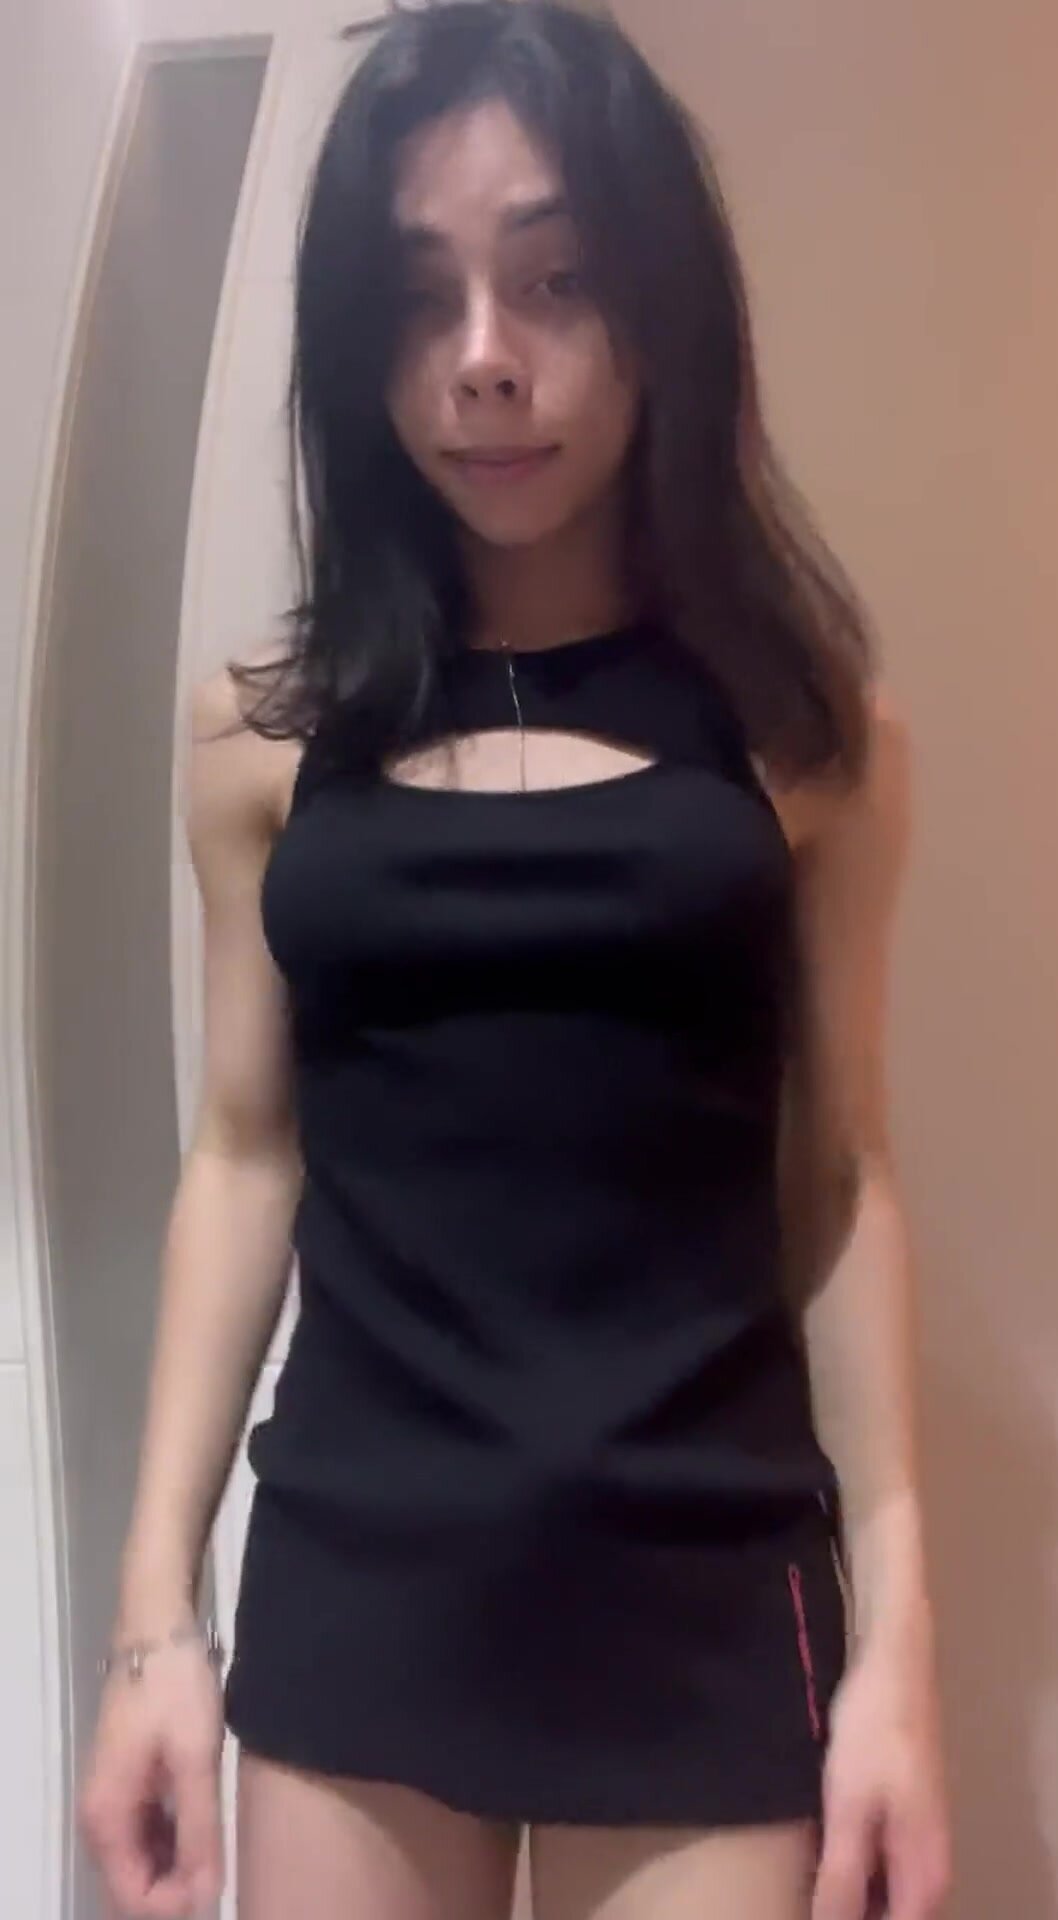 It's hard wearing mini dresses cuz she always ends up with a boner. Altbonny from Chaturbate